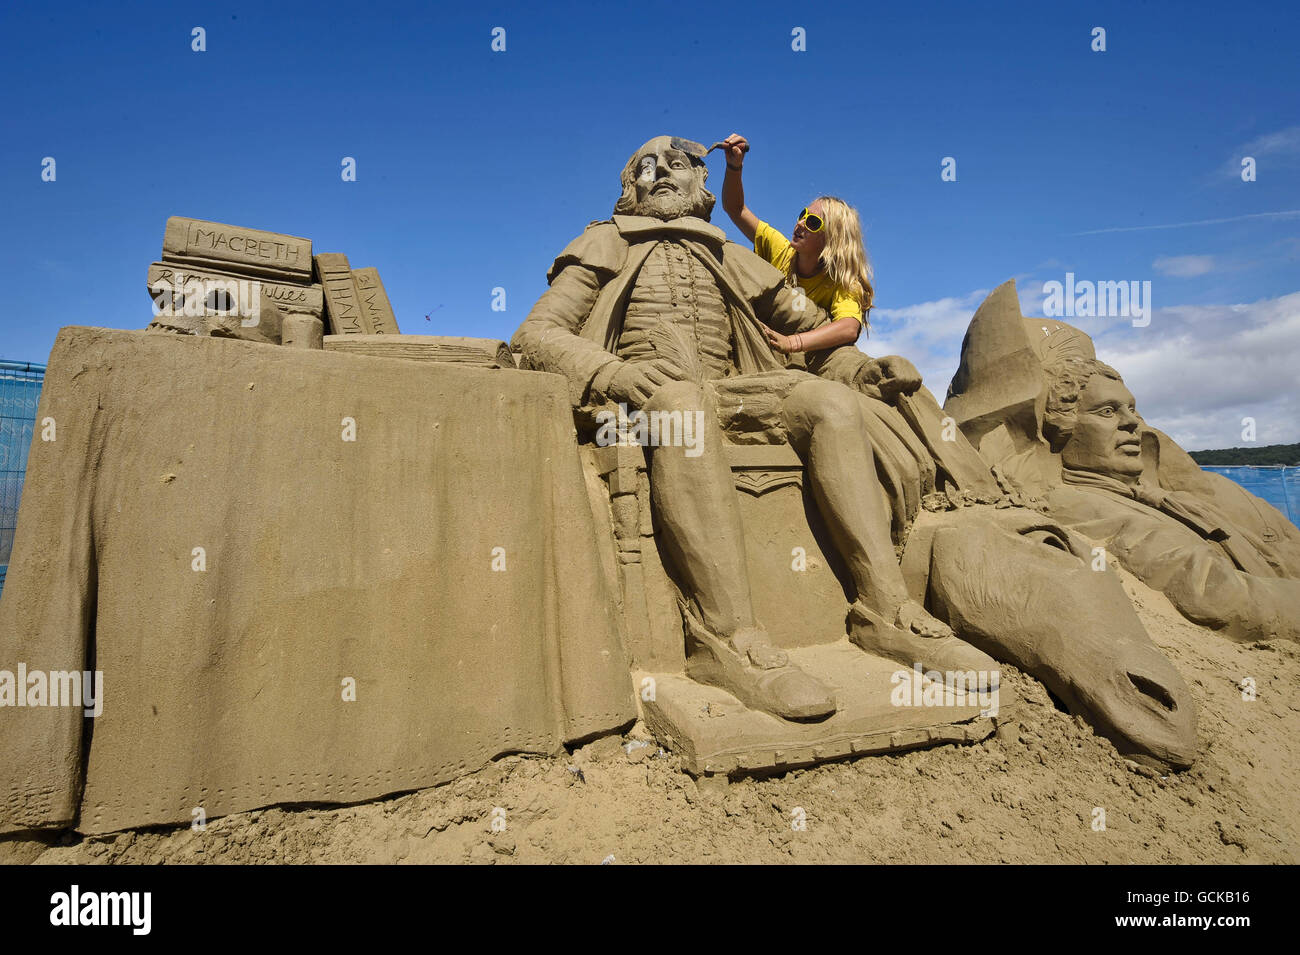 Sand sculptor and artist Nicola Wood, aged 27, from Leicester works on her sculpture of William Shakespear in the Weston-super-Mare Sand Sculpture Festival on the beach, which this year has the theme and celebration of all things British. Stock Photo